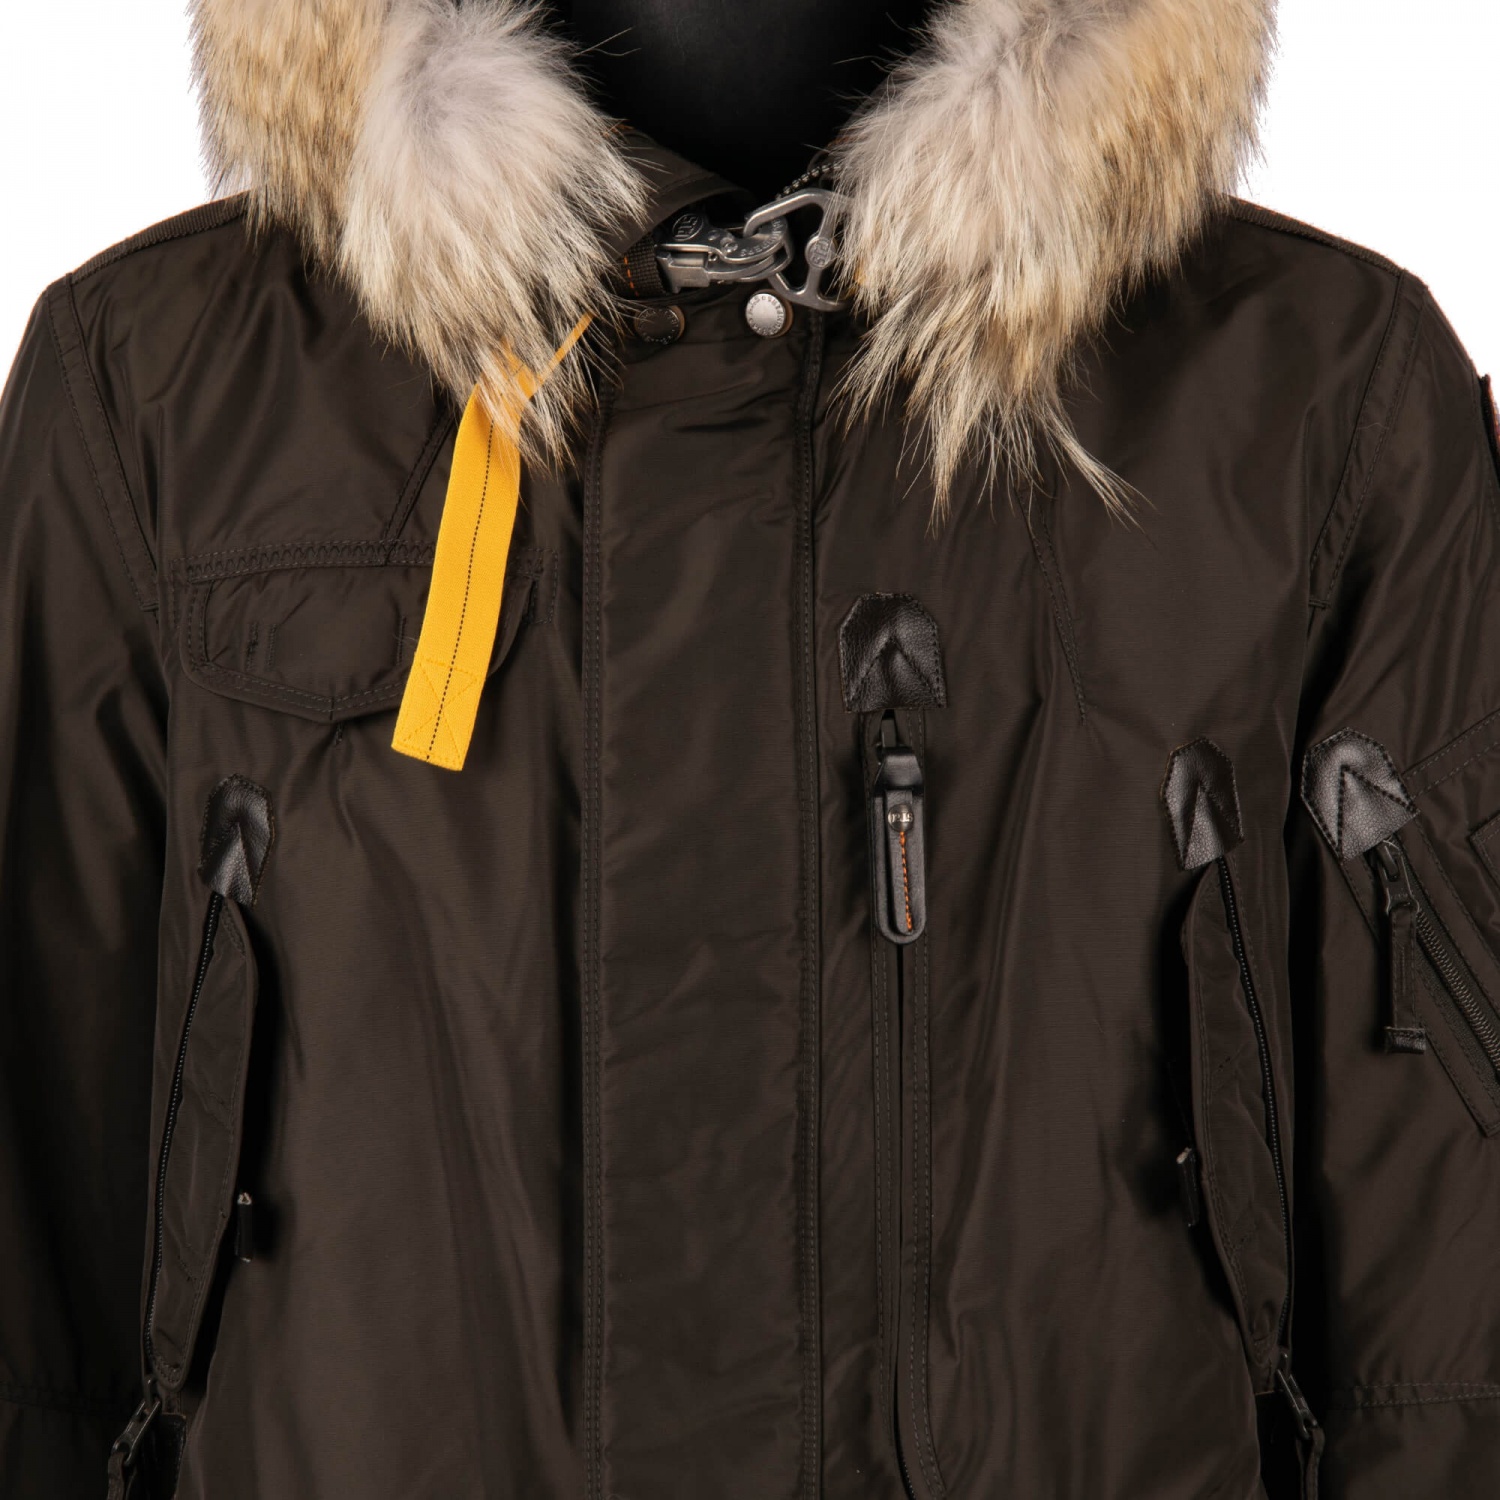 PARAJUMPERS Parka Down Jacket RIGHT HAND with Fur Hood Pockets Rush ...